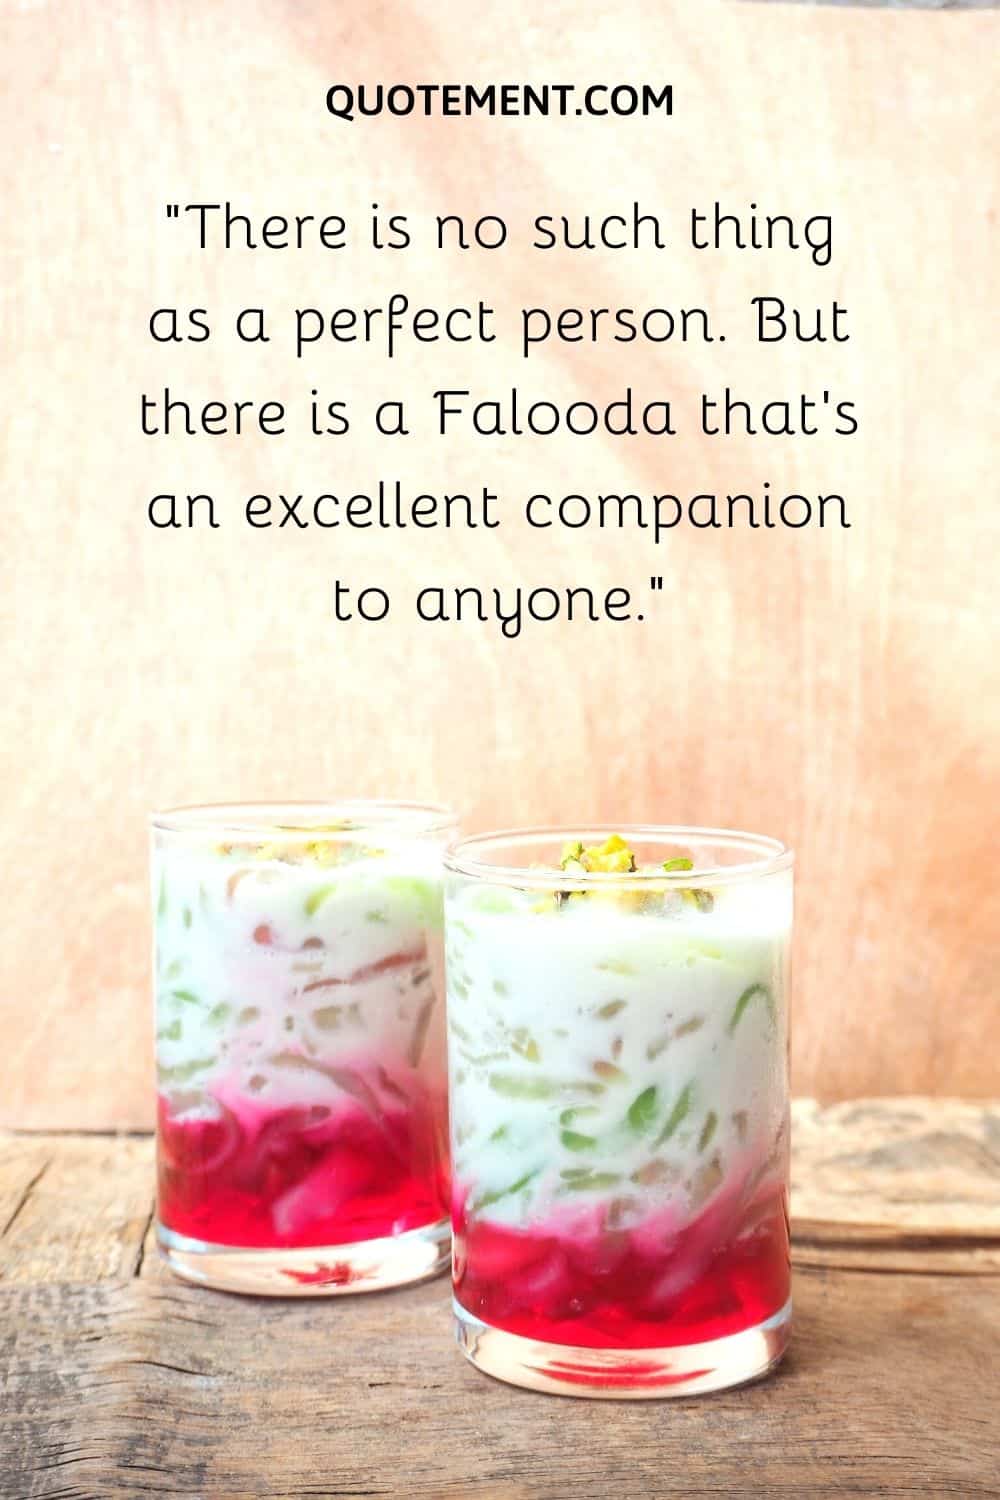 There is no such thing as a perfect person. But there is a Falooda that’s an excellent companion to anyone